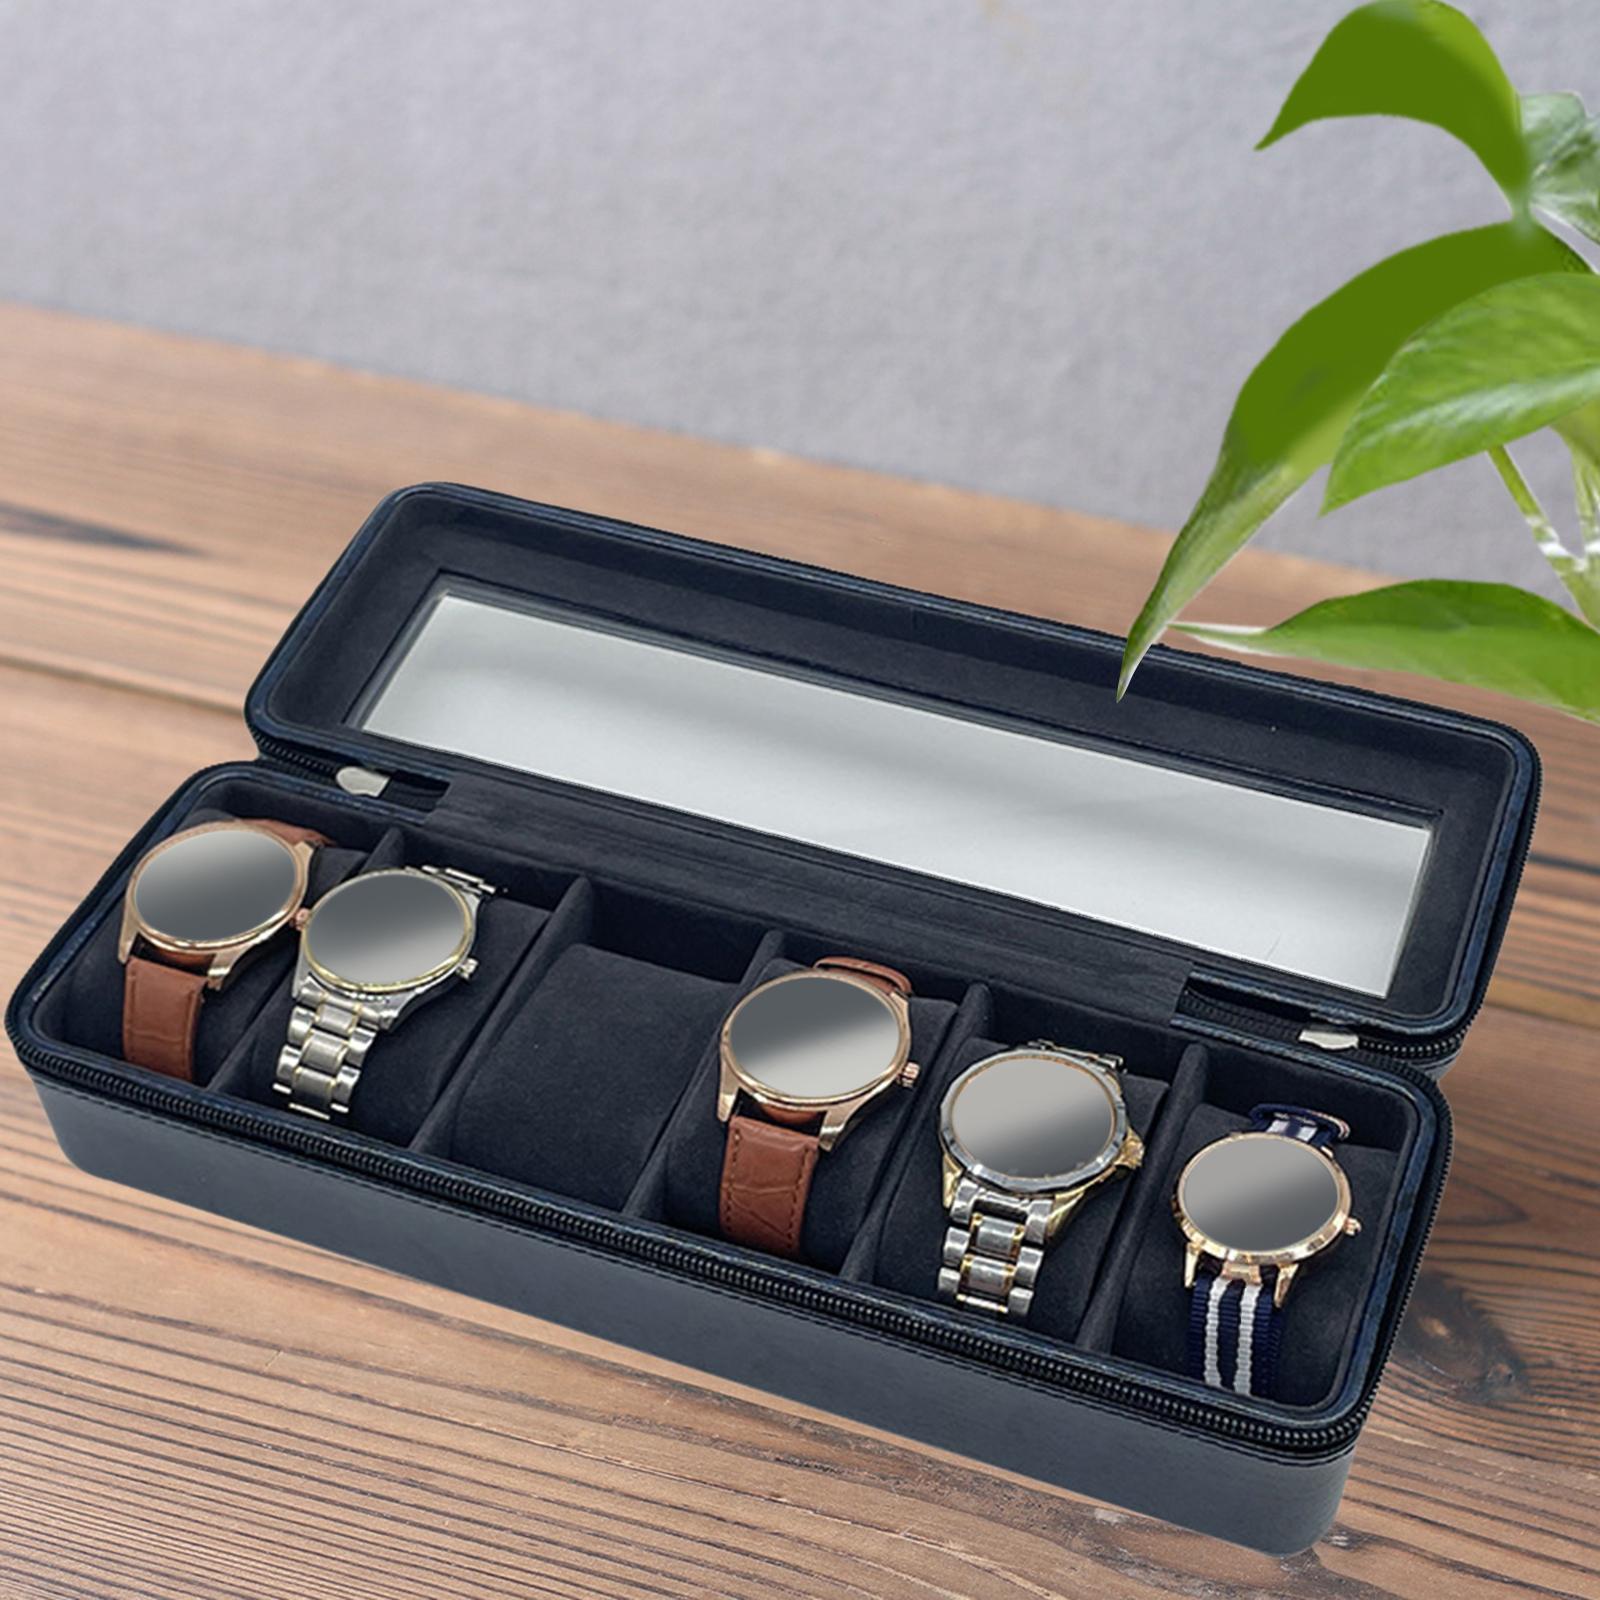 Watch Box Fits All Wristwatches 6 Slot Jewelry Storage for Men and Women